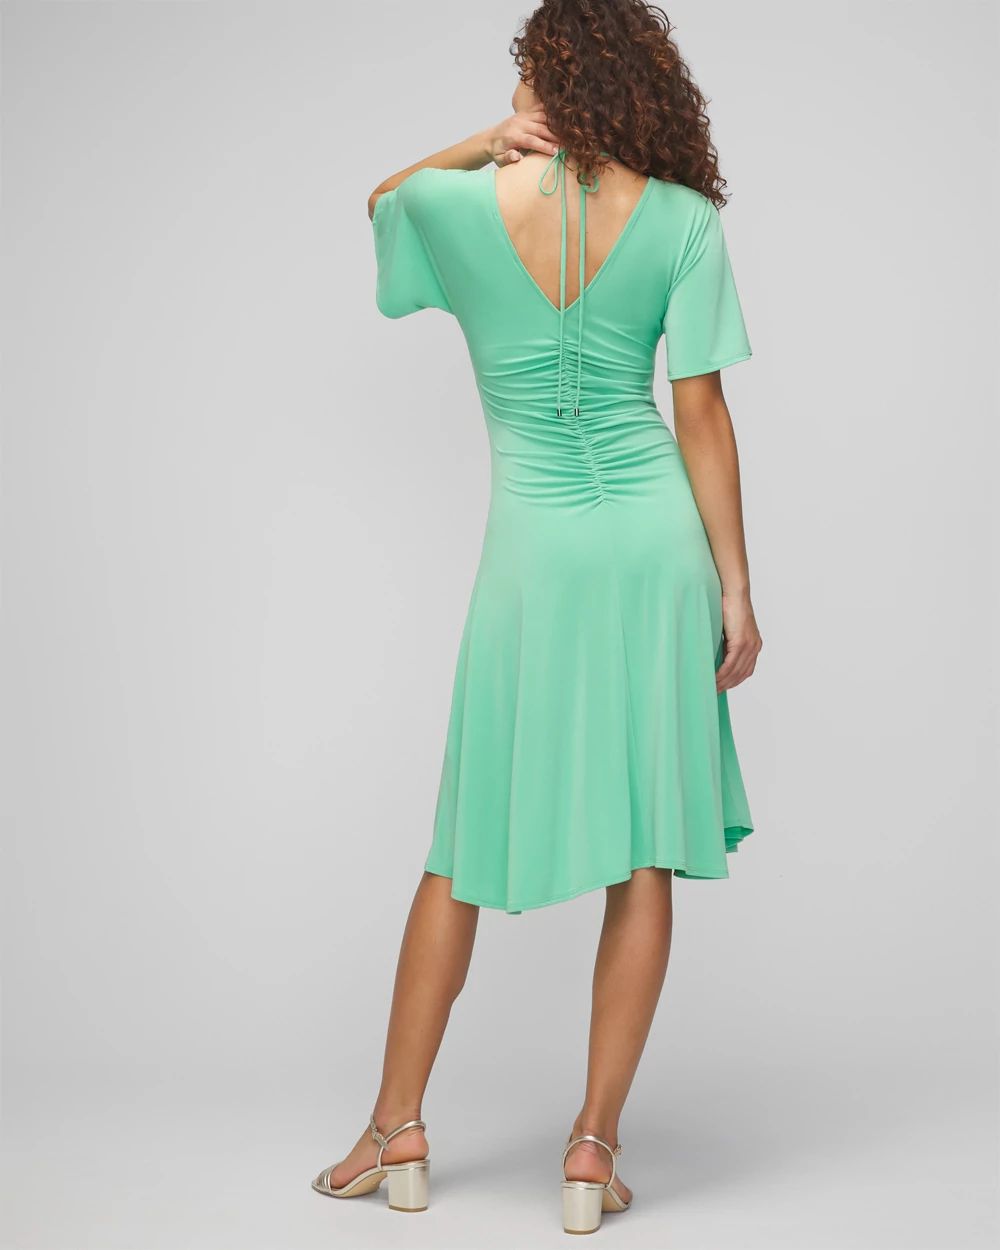 Short Sleeve Ruched Front Matte Jersey Dress click to view larger image.